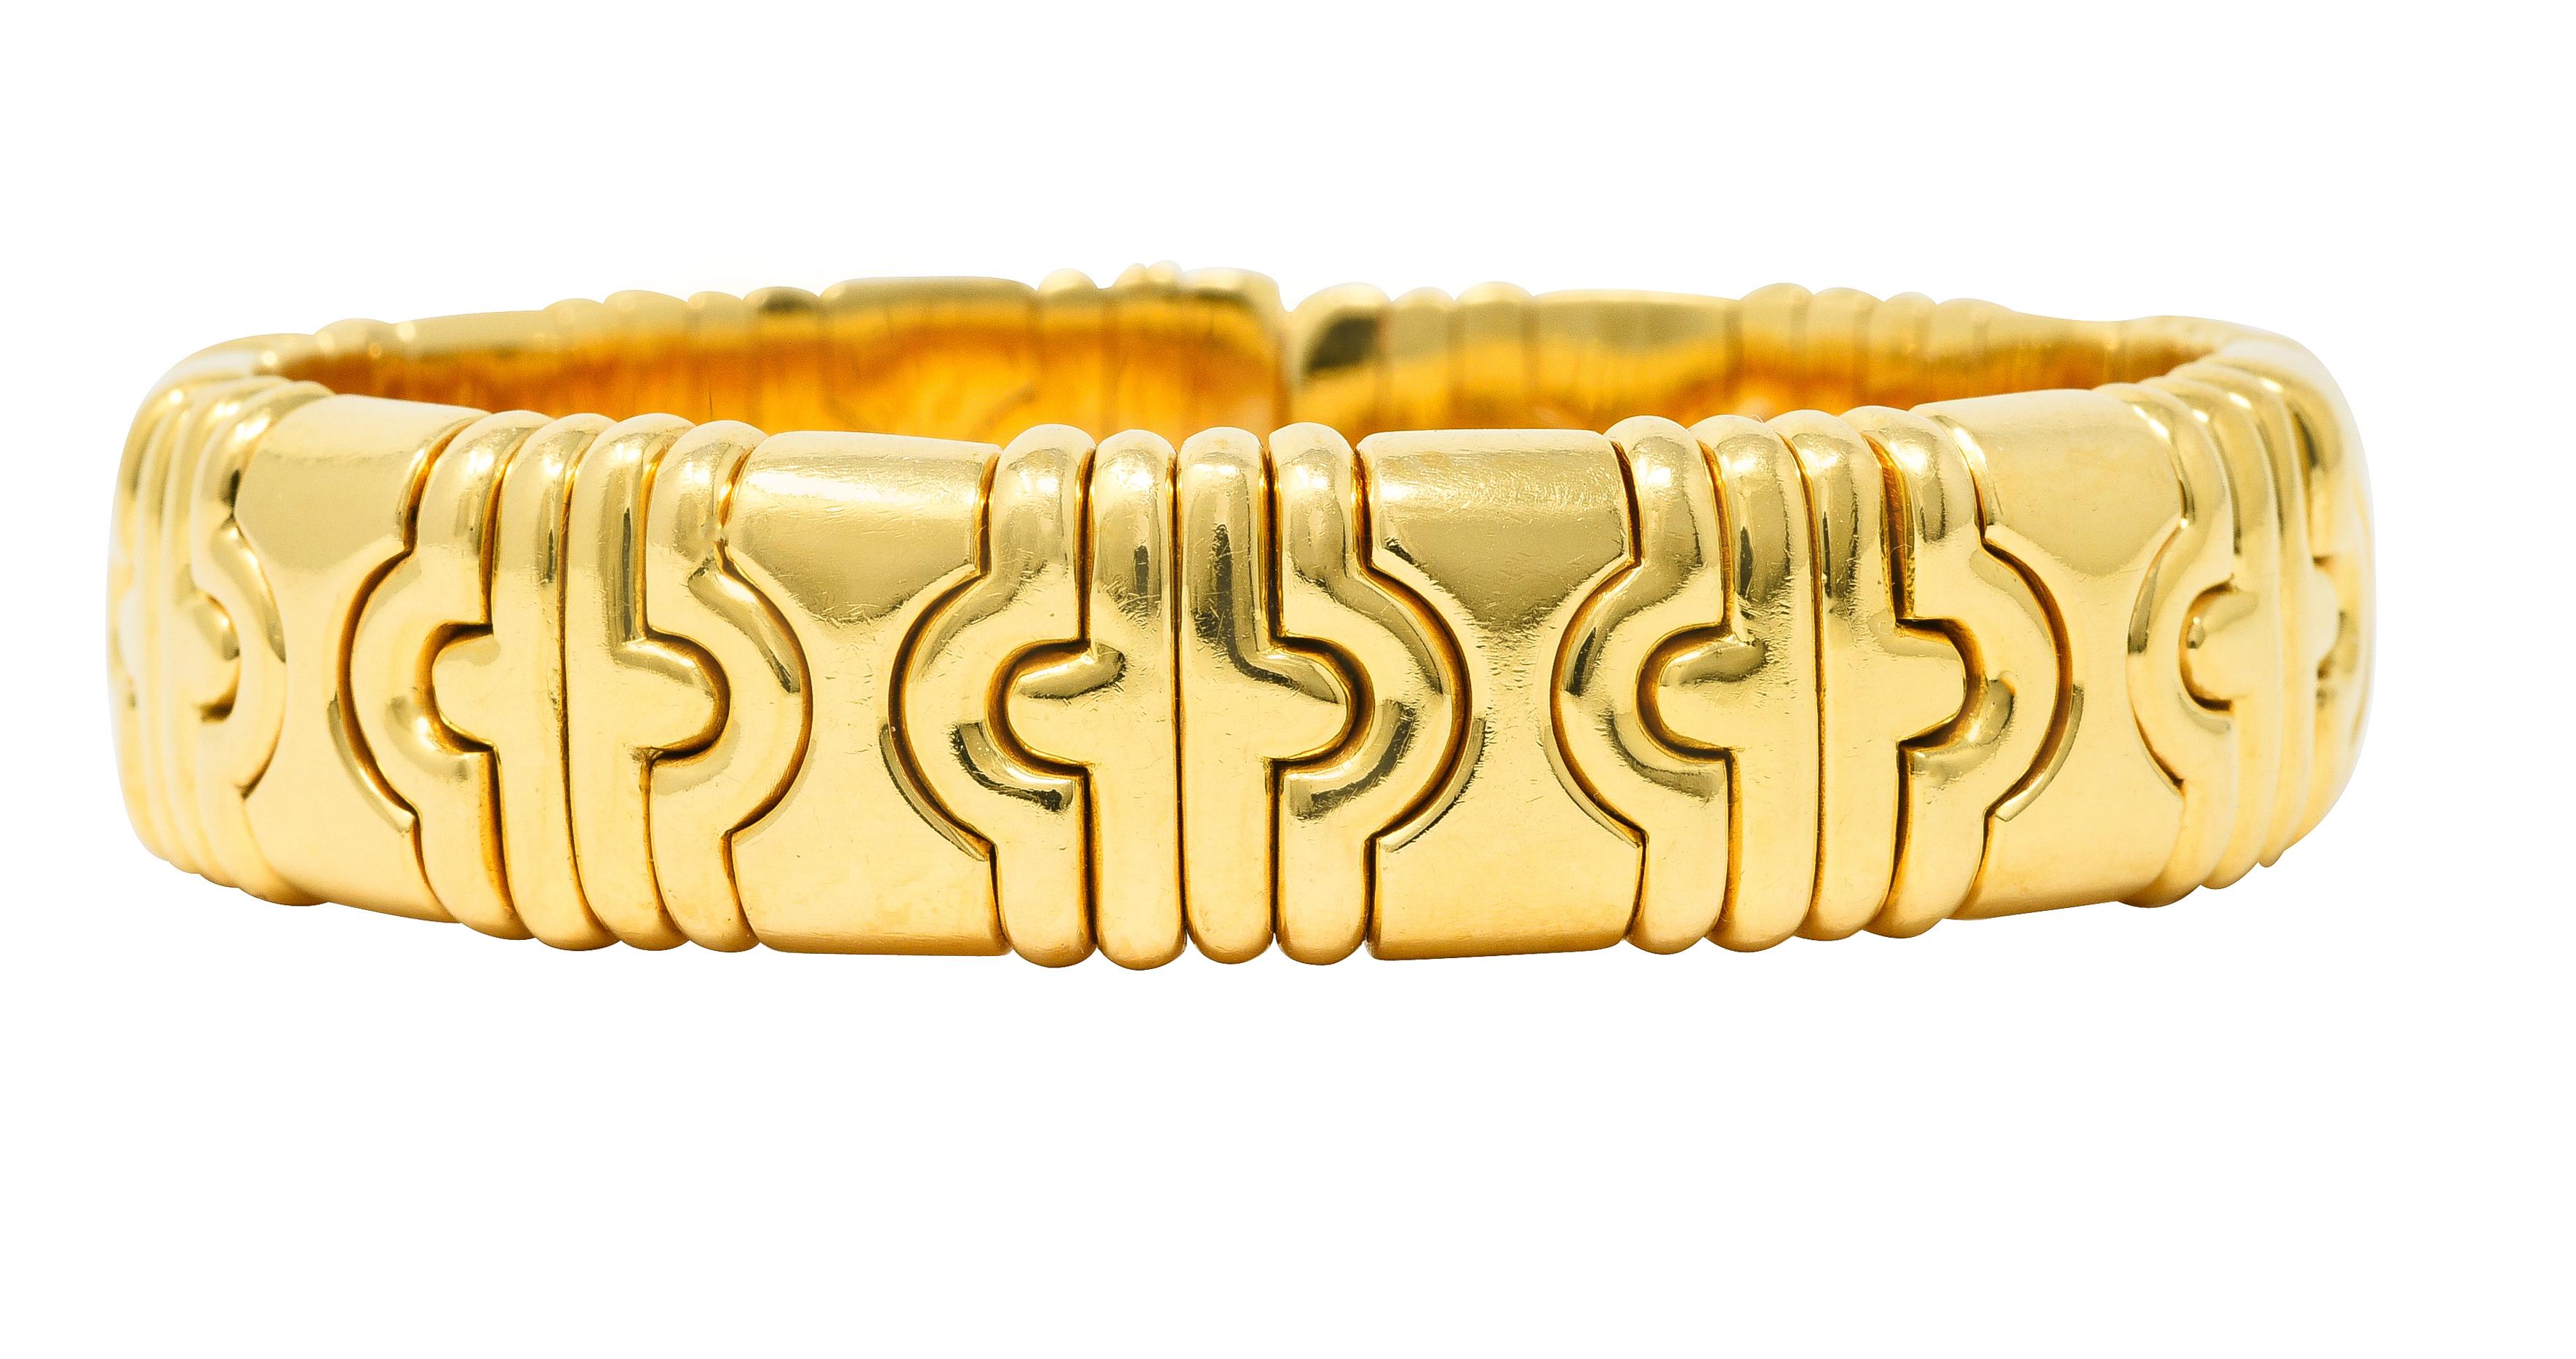 Bracelet is comprised of segmented links - with considerable flex. Links feature signature Parentesi motif - fitted curving segments. Featuring flush open terminals. With high polish finish. Stamped 750 with Italian assay marks for 18 karat gold.